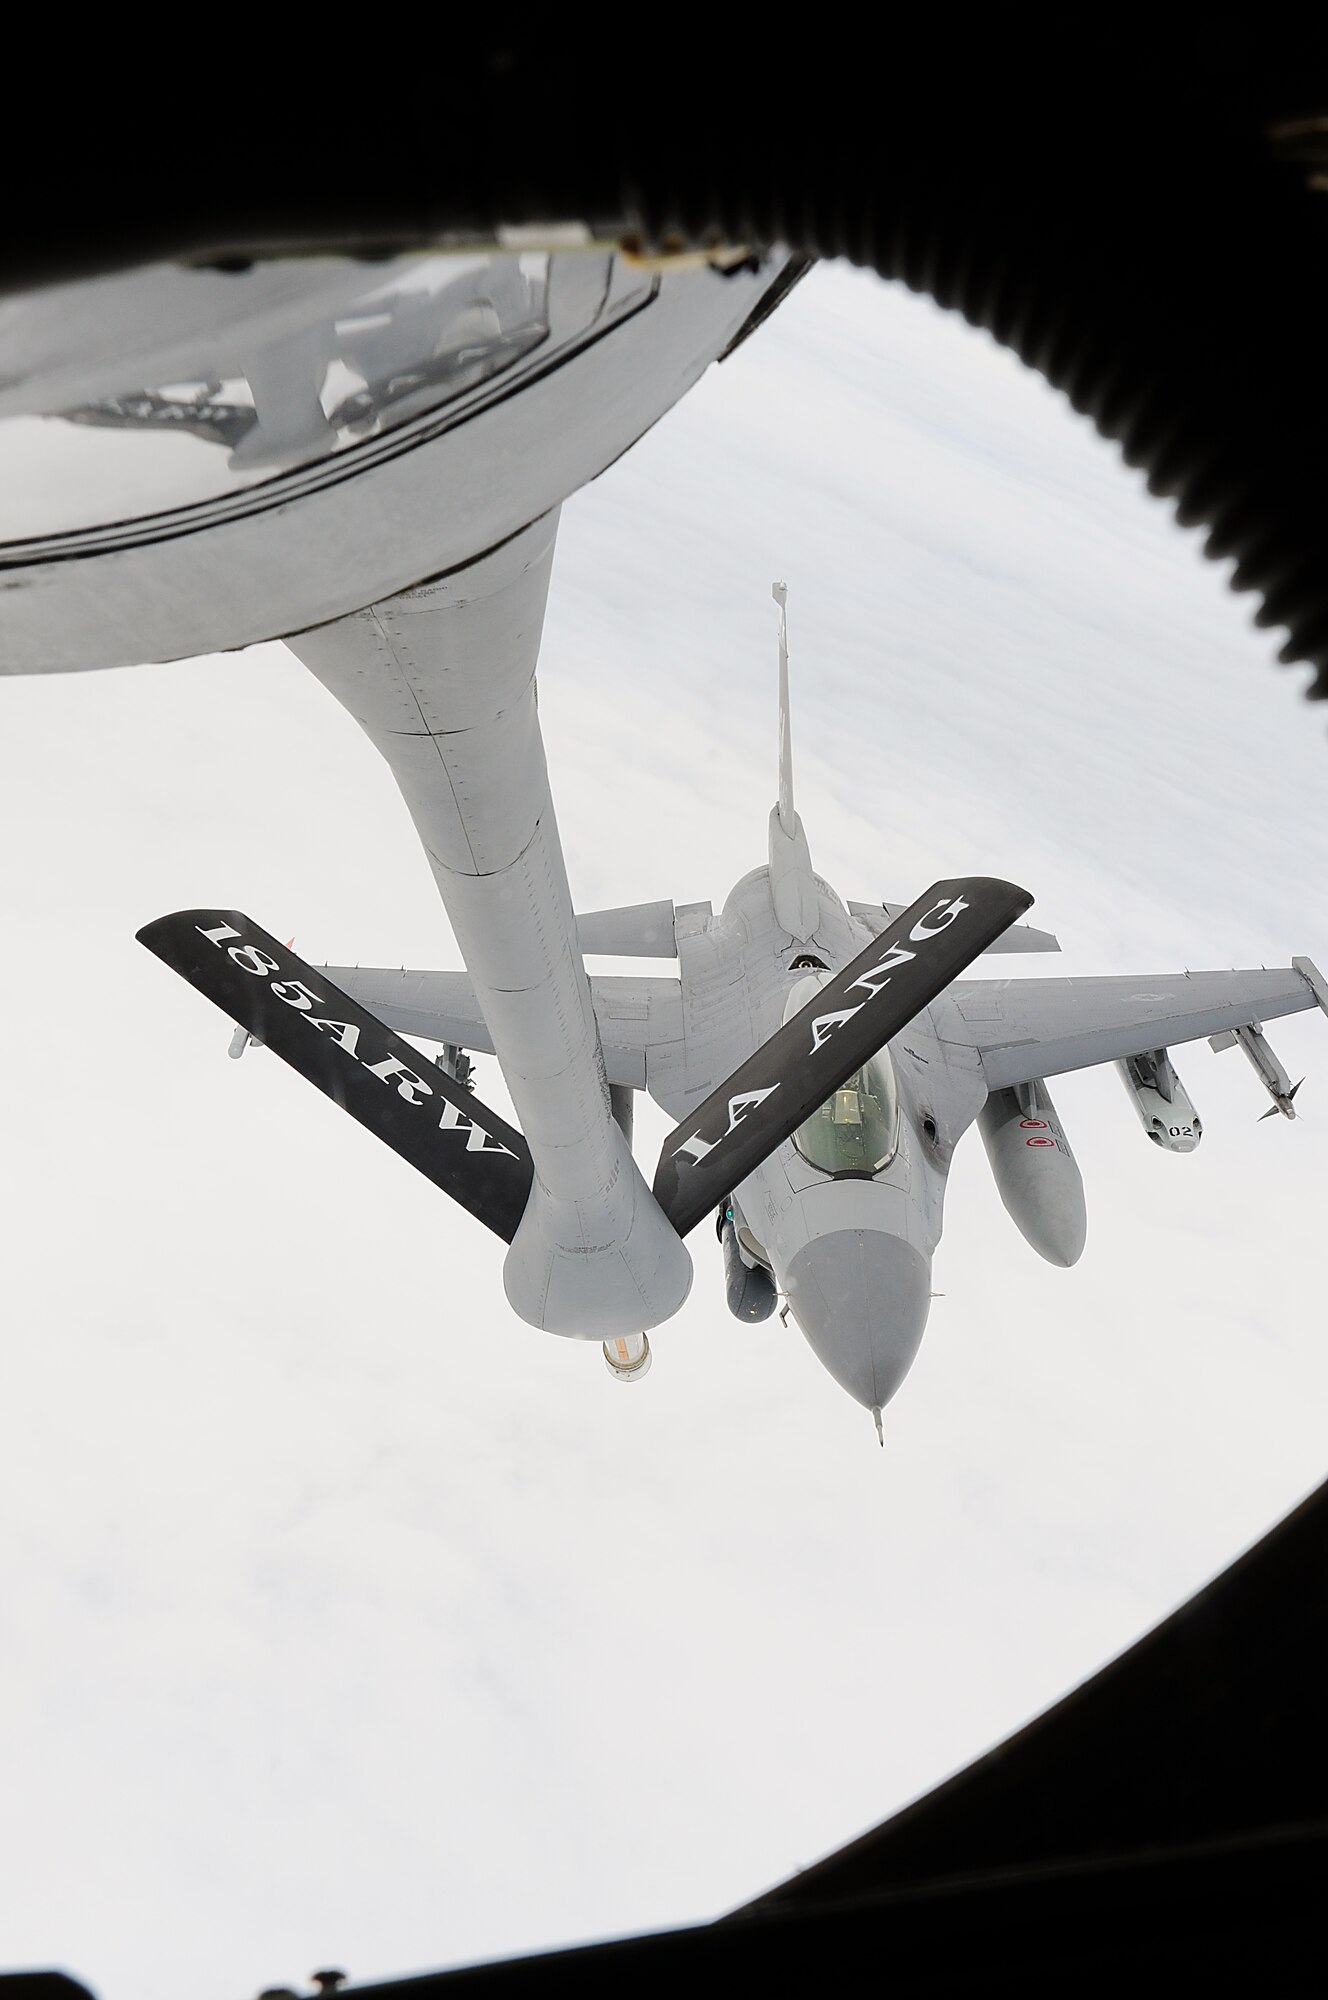 An F-16 assigned to the Texas Air National Guard's 149th Fighter Wing at Lackland Air Force Base, Texas, approaches a KC-135 assigned to the Iowa Air National Guard's 185th Air Refueling Wing for in-flight refueling, over South Texas, on March 6, 2010. (U.S. Air Force photo by Tech. Sgt. Rene Castillo/Released)